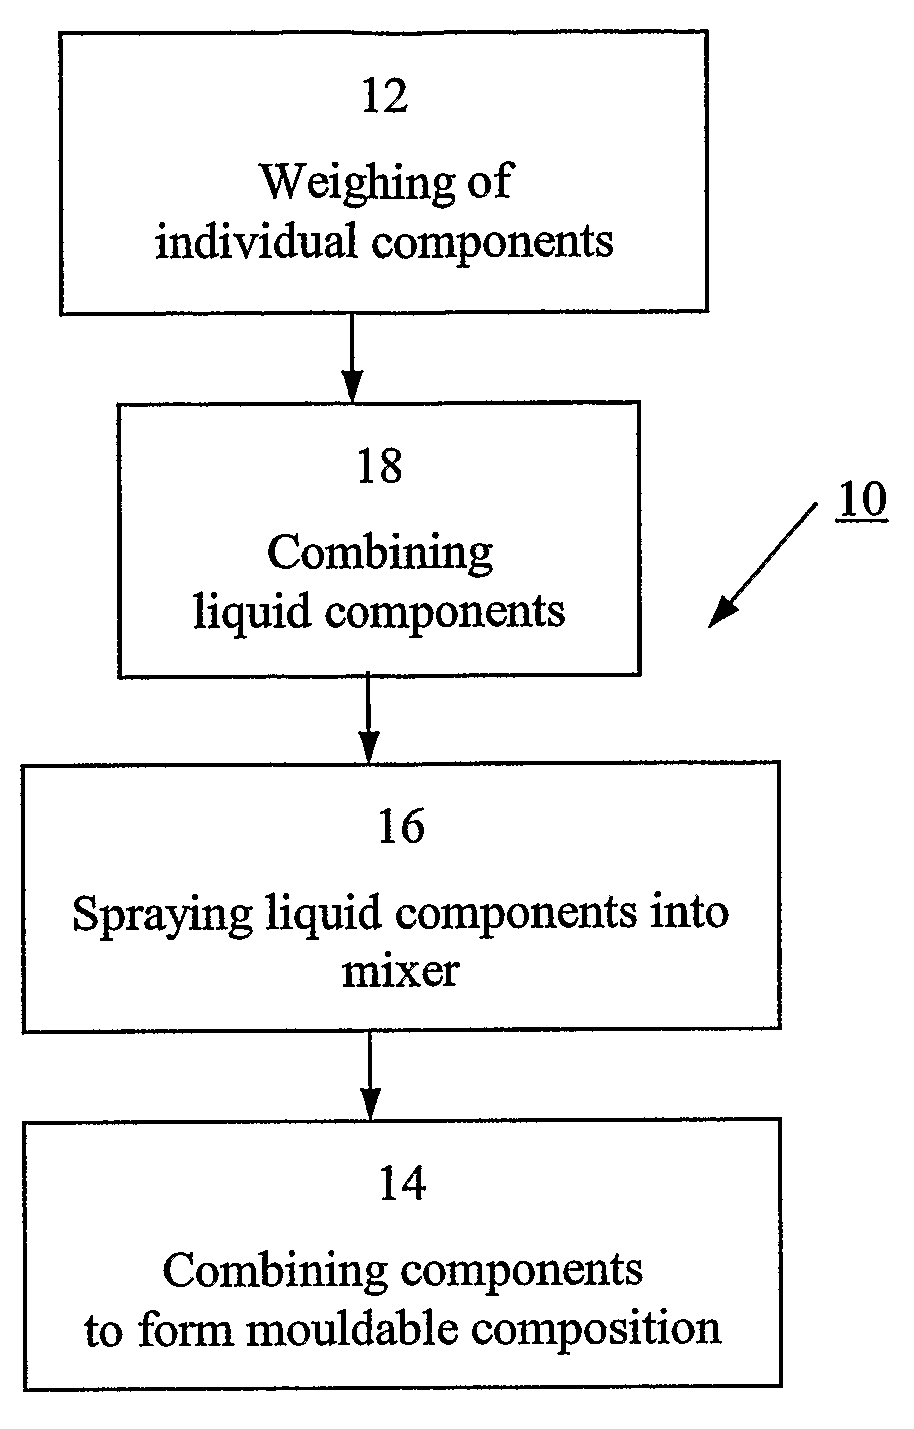 Method to Form a High Strength Moulded Product